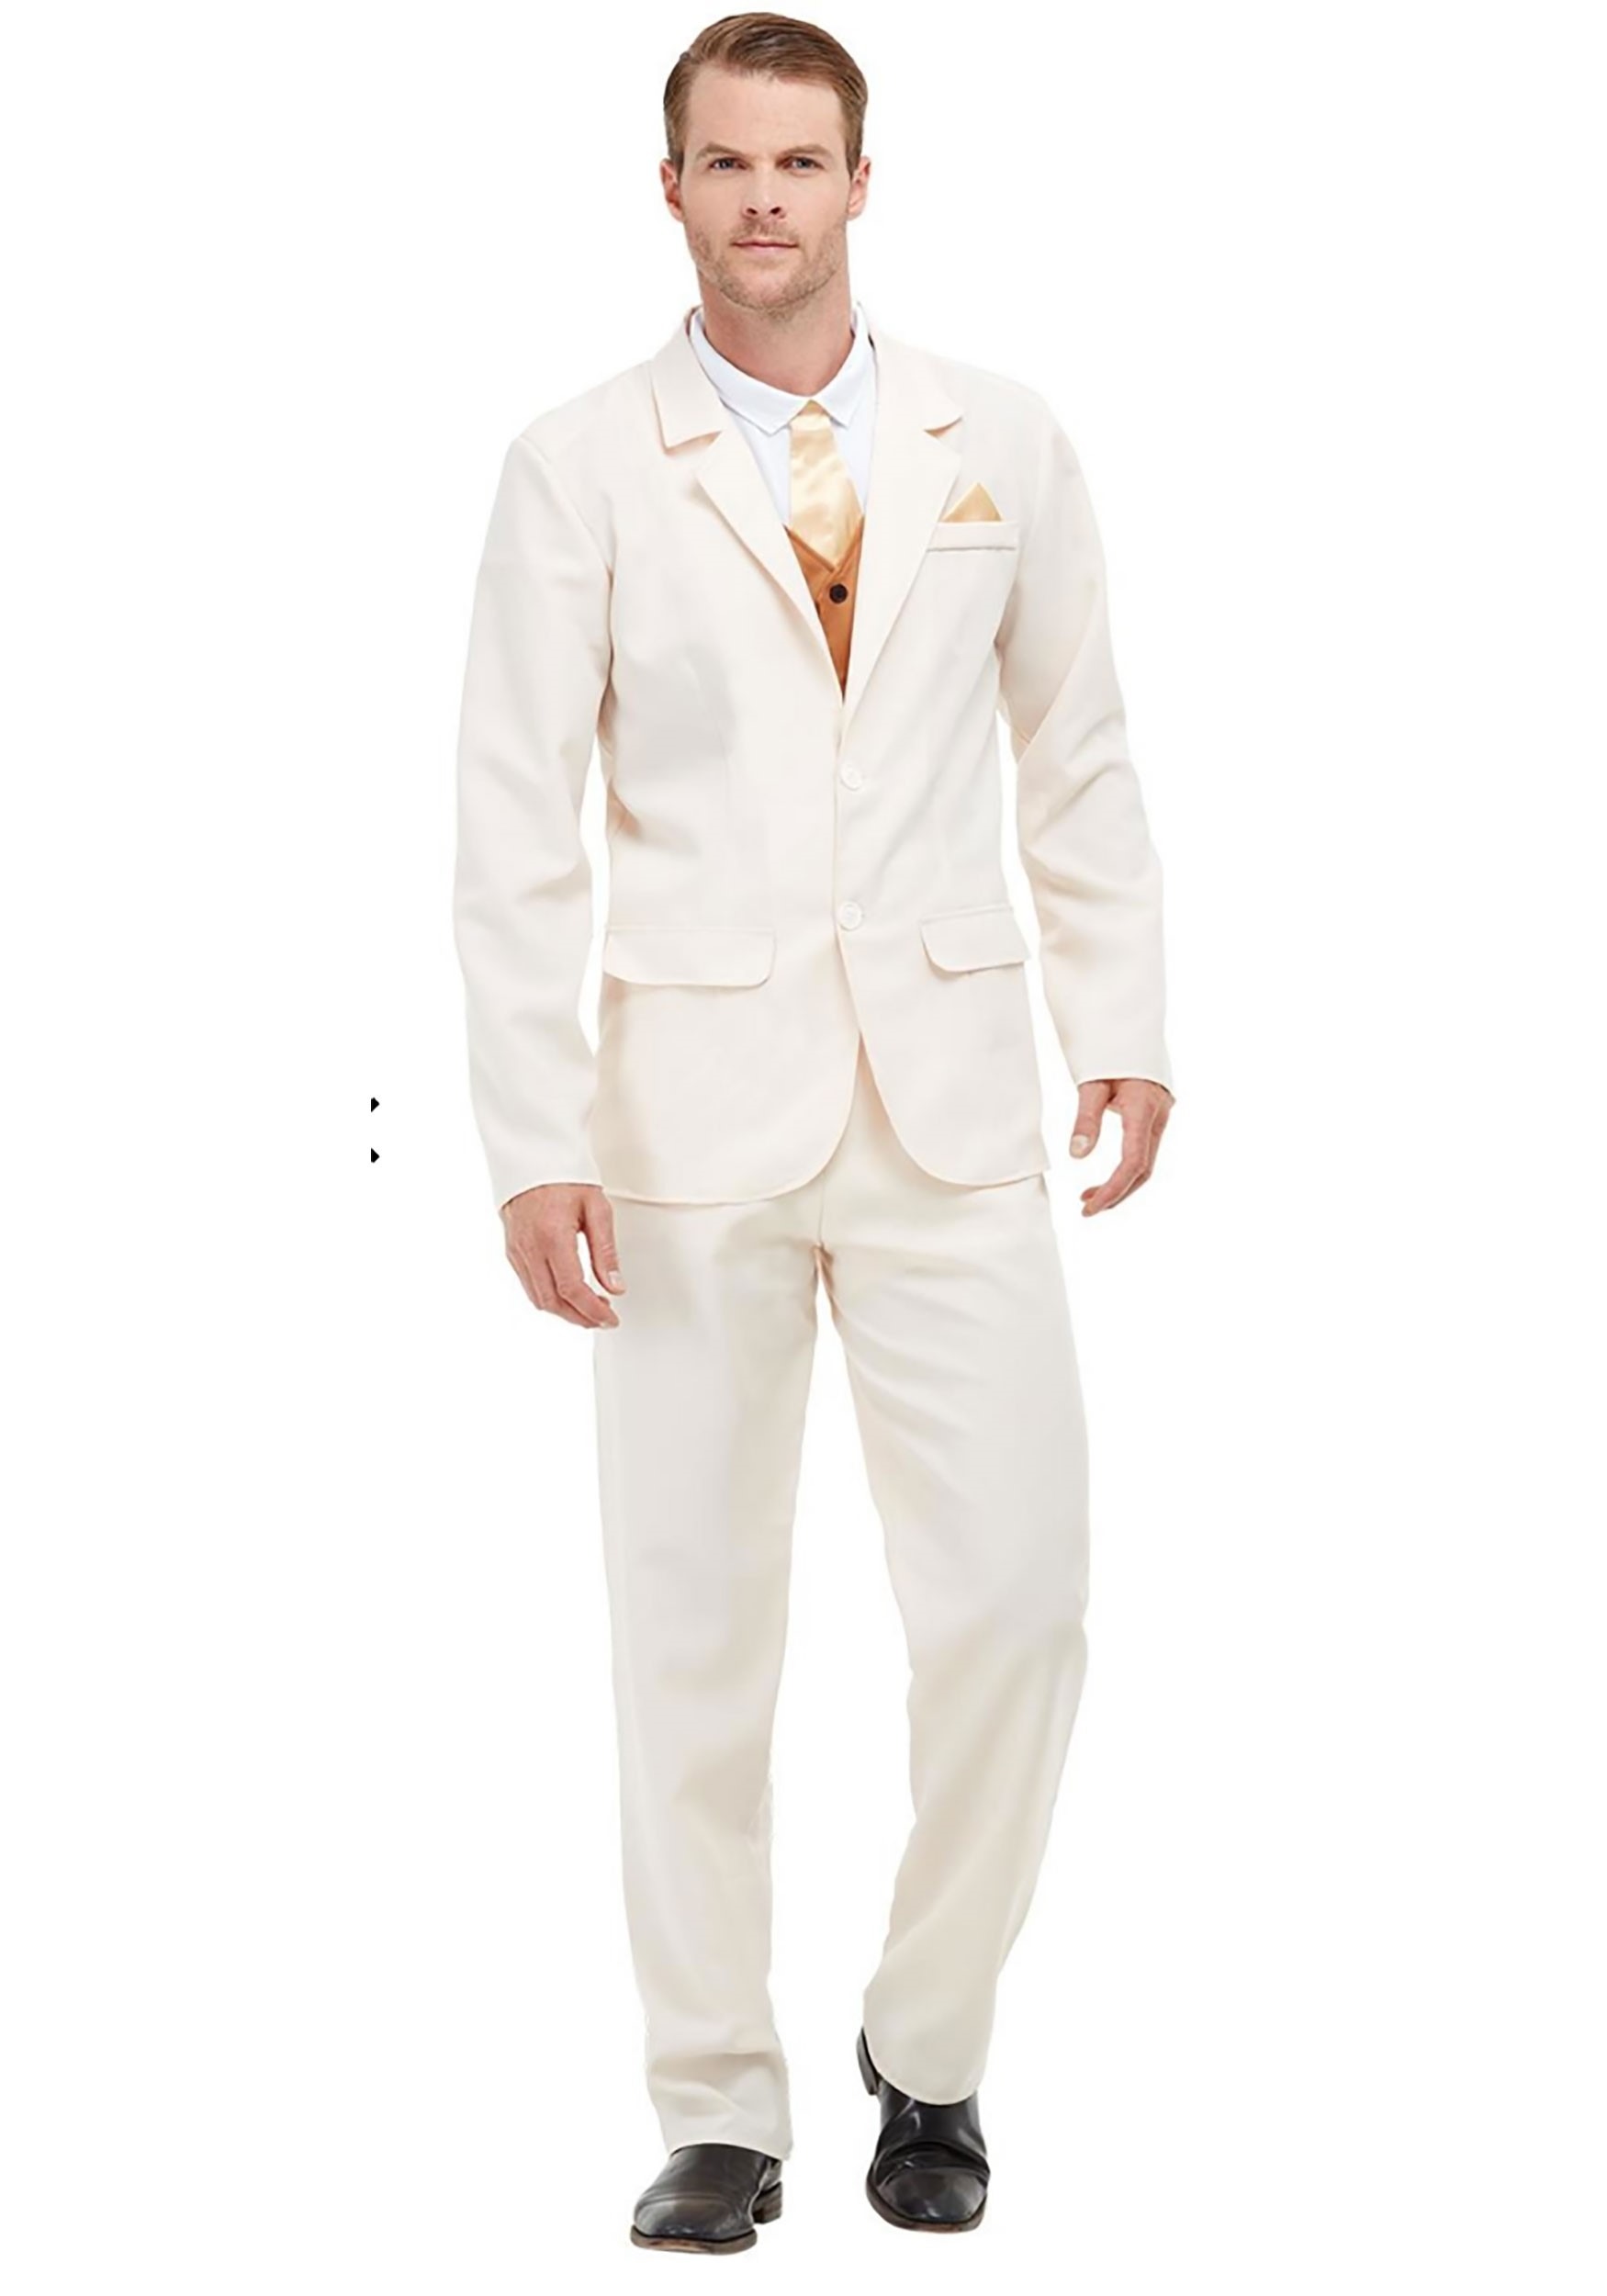 Roaring 20s White Fancy Dress Costume For Adults